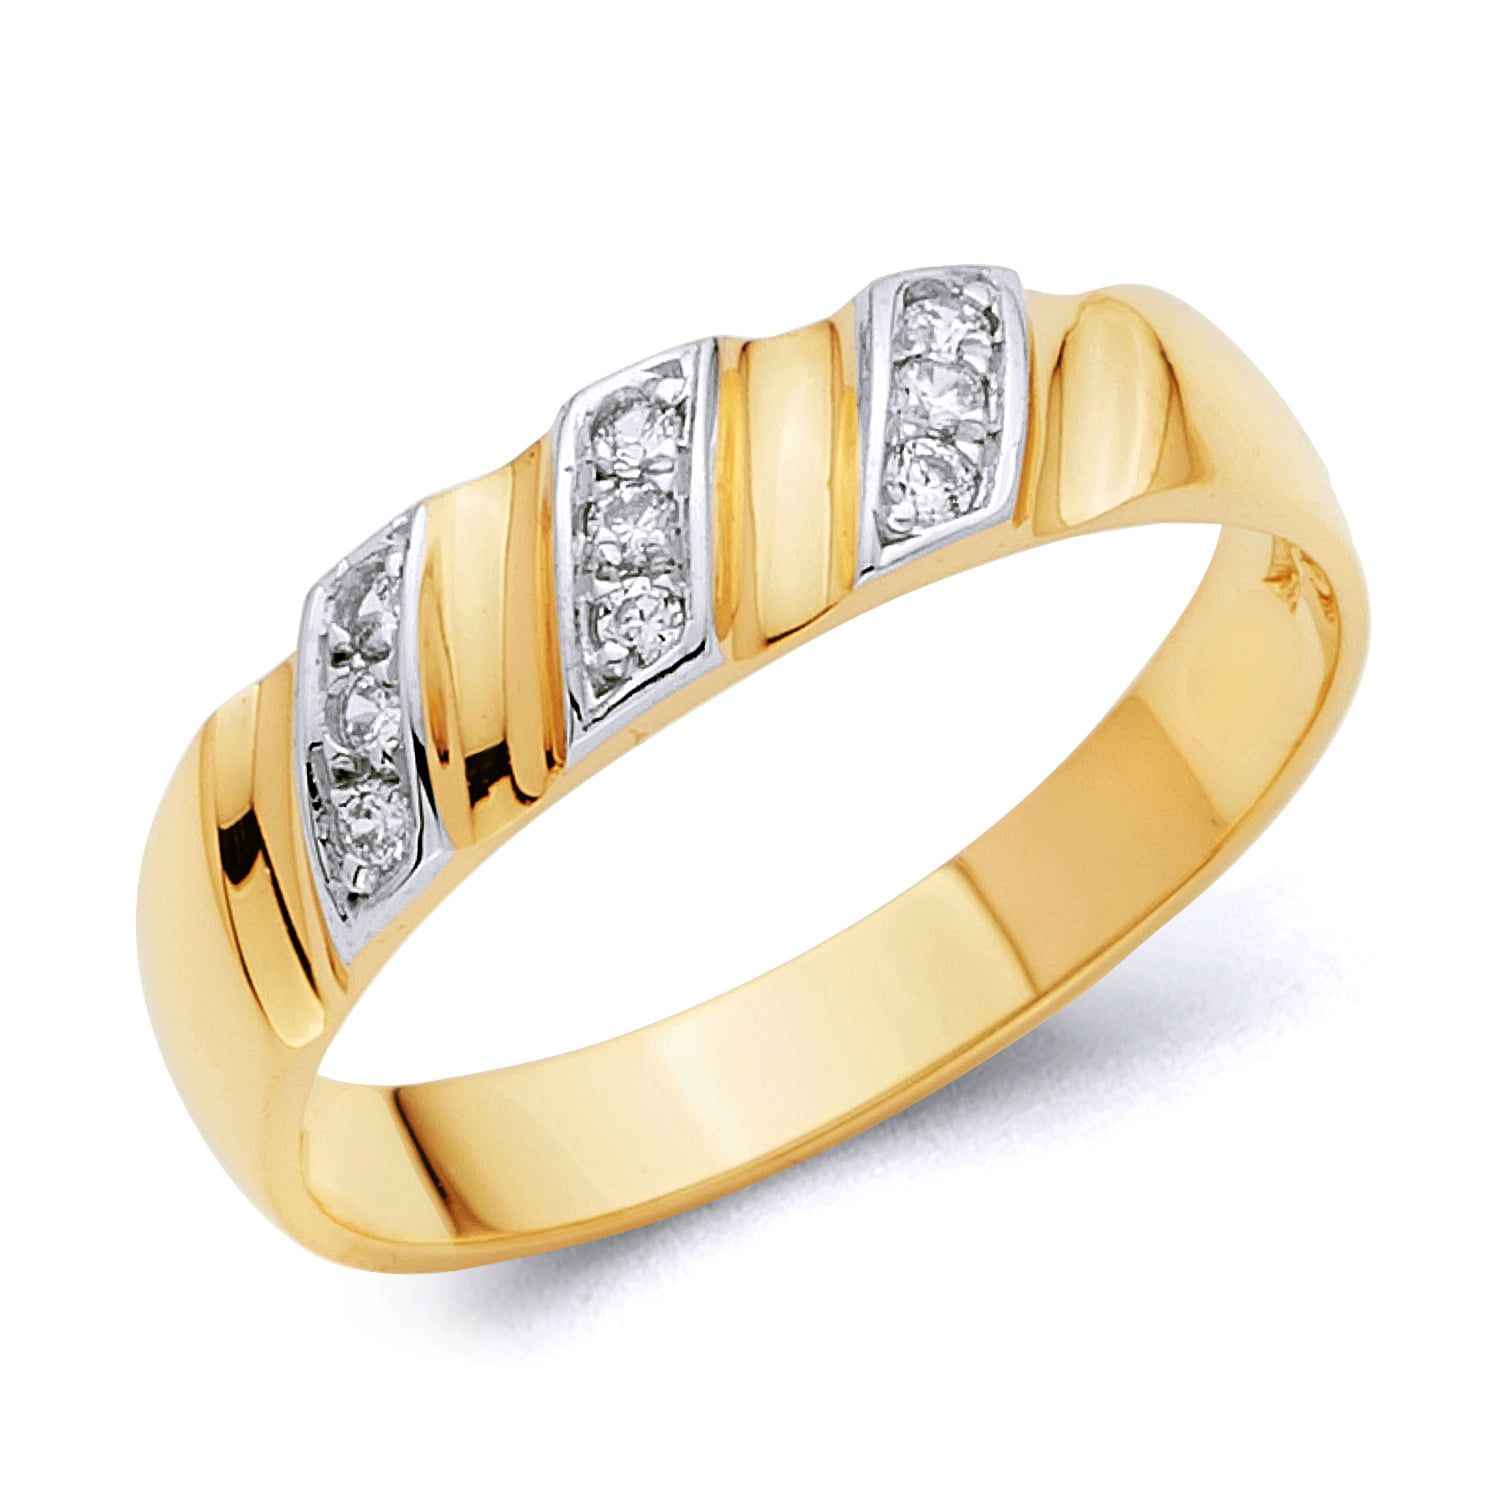 Wellingsale Mens Solid 14k Two 2 Tone White and Yellow Gold Polished CZ Cubic Zirconia Wedding Band 